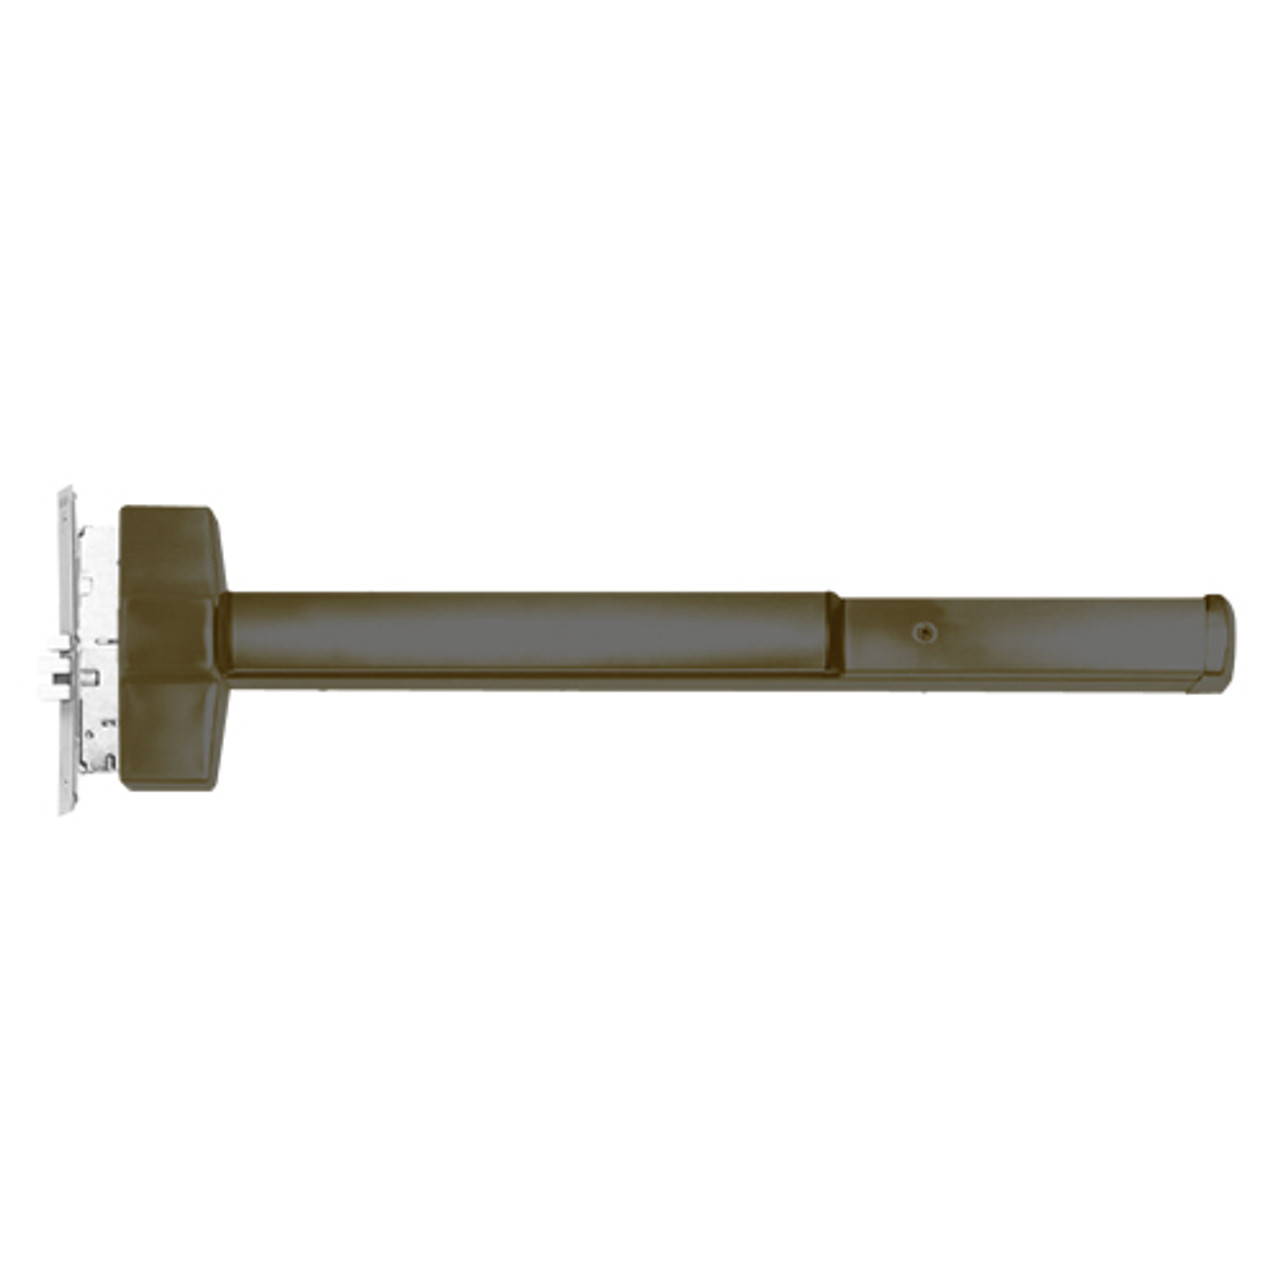 ED5600TD-613-W048-RHR Corbin ED5600 Series Non Fire Rated Mortise Exit Device with Delayed Egress in Oil Rubbed Bronze Finish